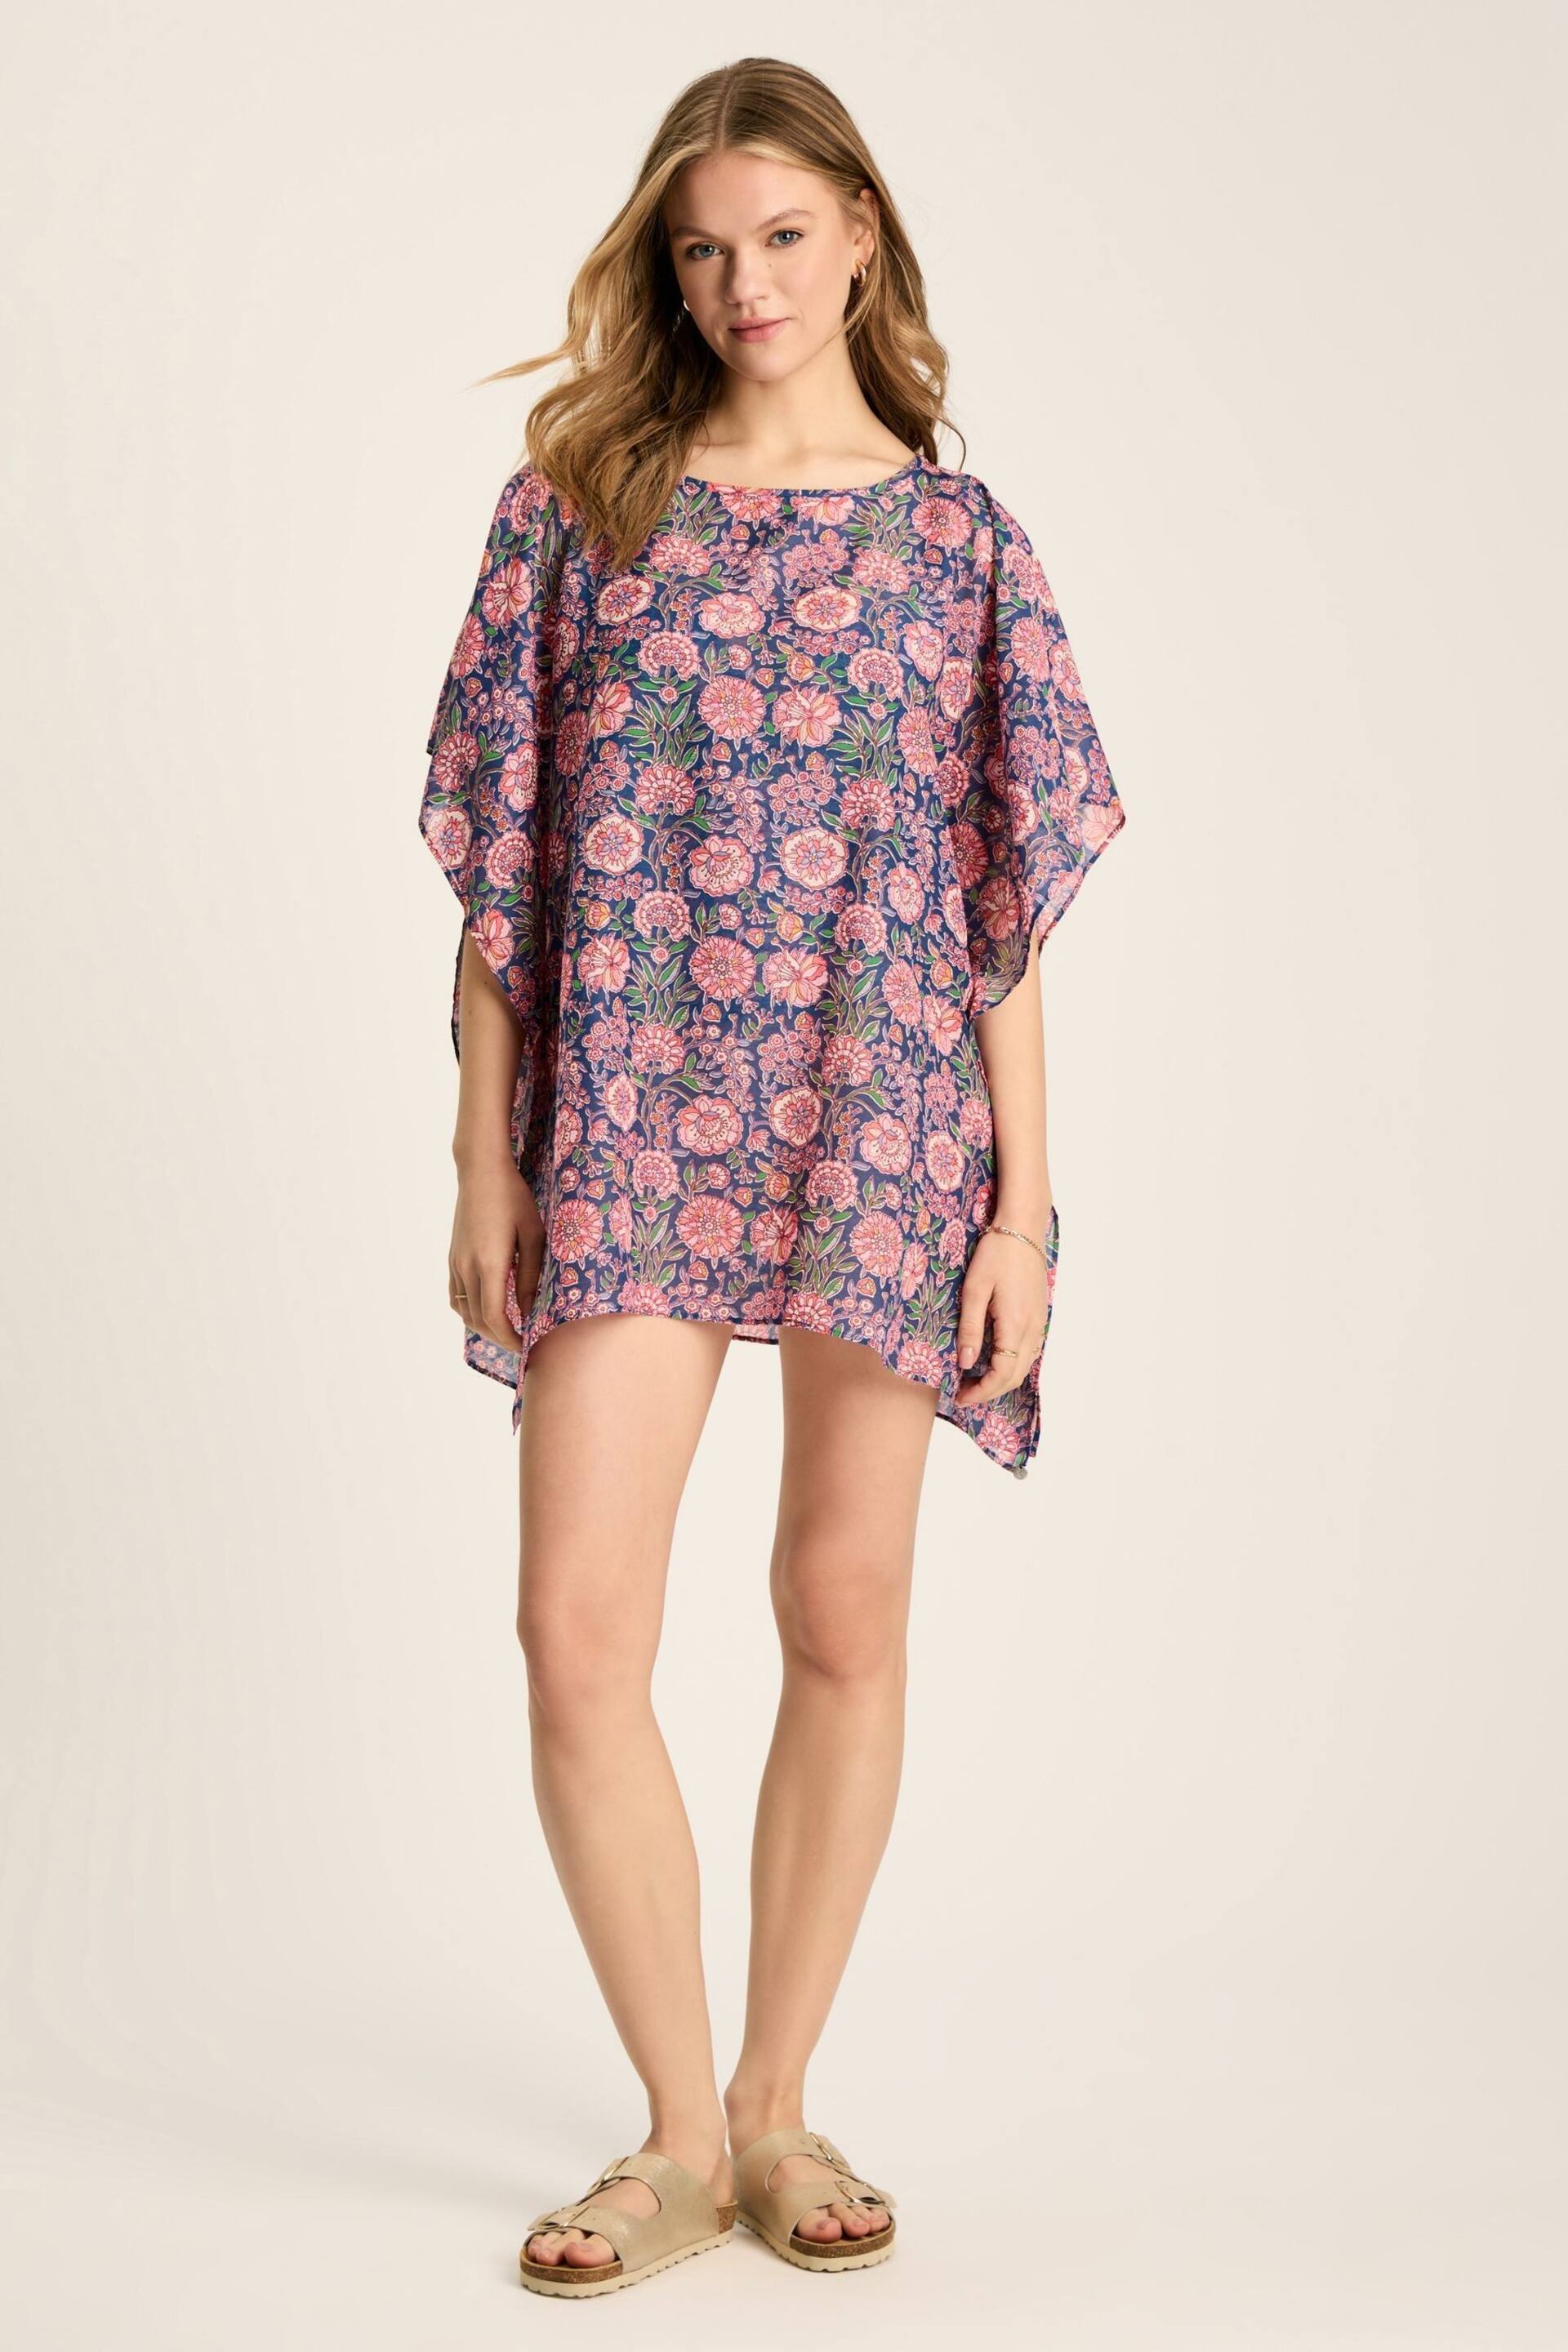 Joules Rosanna Multi Beach Cover-Up - Image 4 of 7